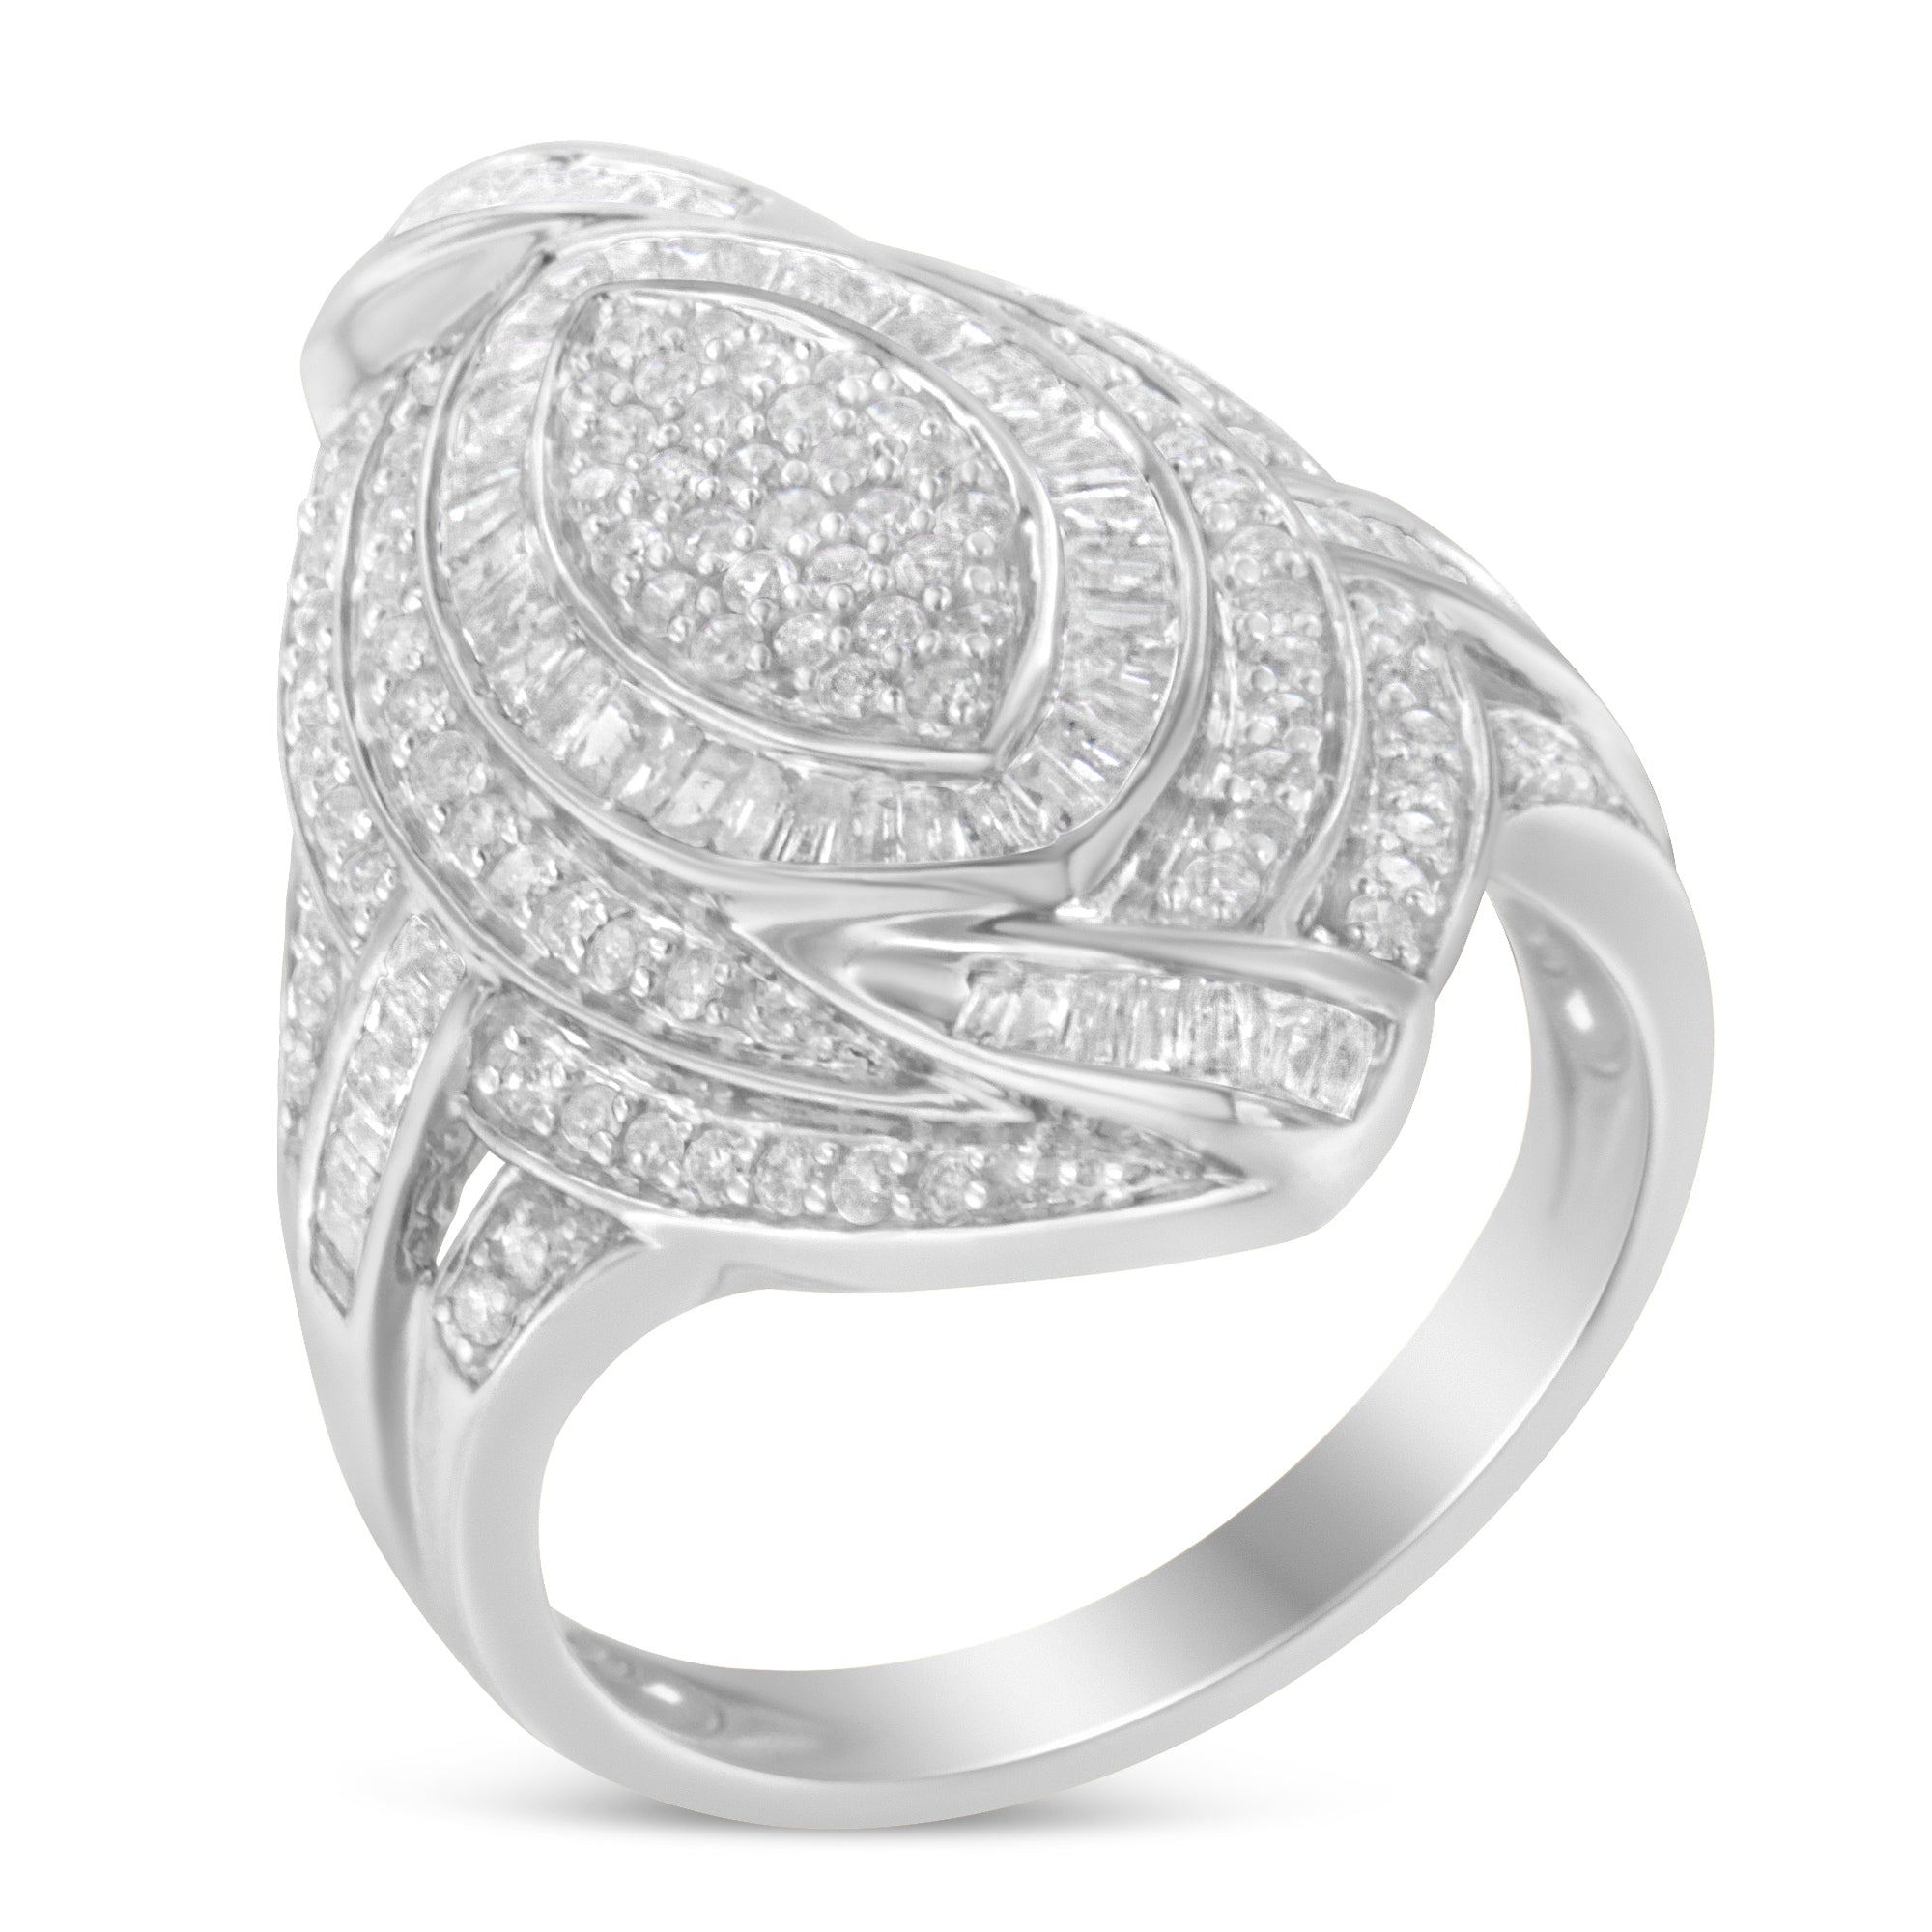 .925-Sterling-Silver-&-1-1/8-Cttw-Diamond-Marquise-Shaped-Cluster-Triple-Halo-Knot-Cocktail-Fashion-Ring-(I-J-Color,-I2-I3-Clarity)-Size-7-1/4-Rings